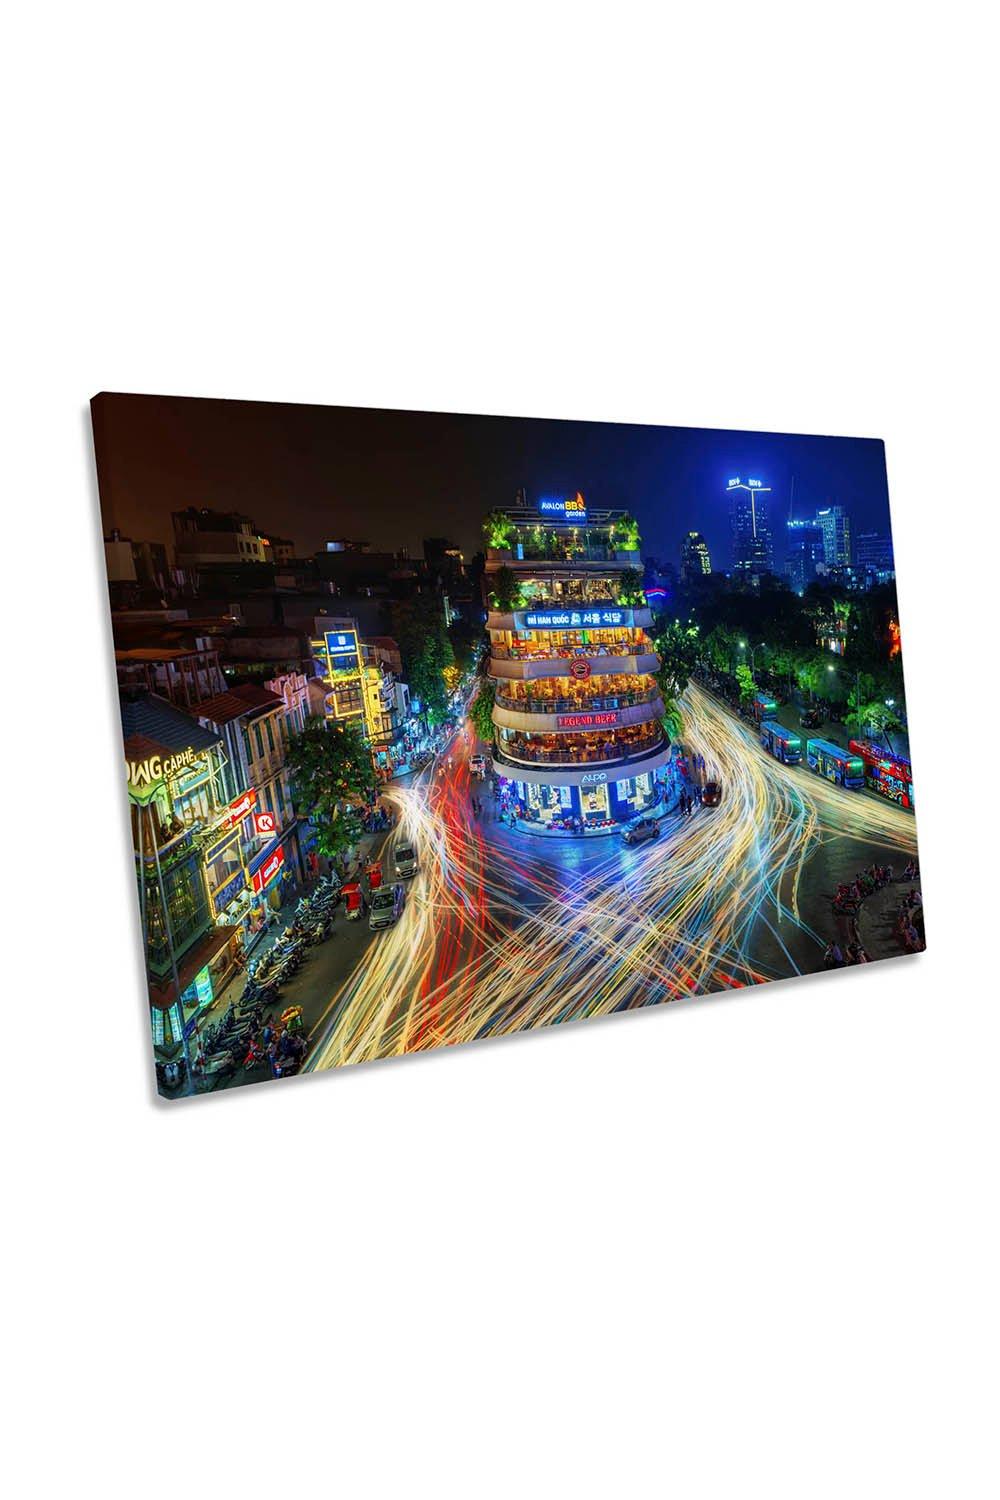 The Order of Chaos Hanoi Vietnam City Traffic Canvas Wall Art Picture Print